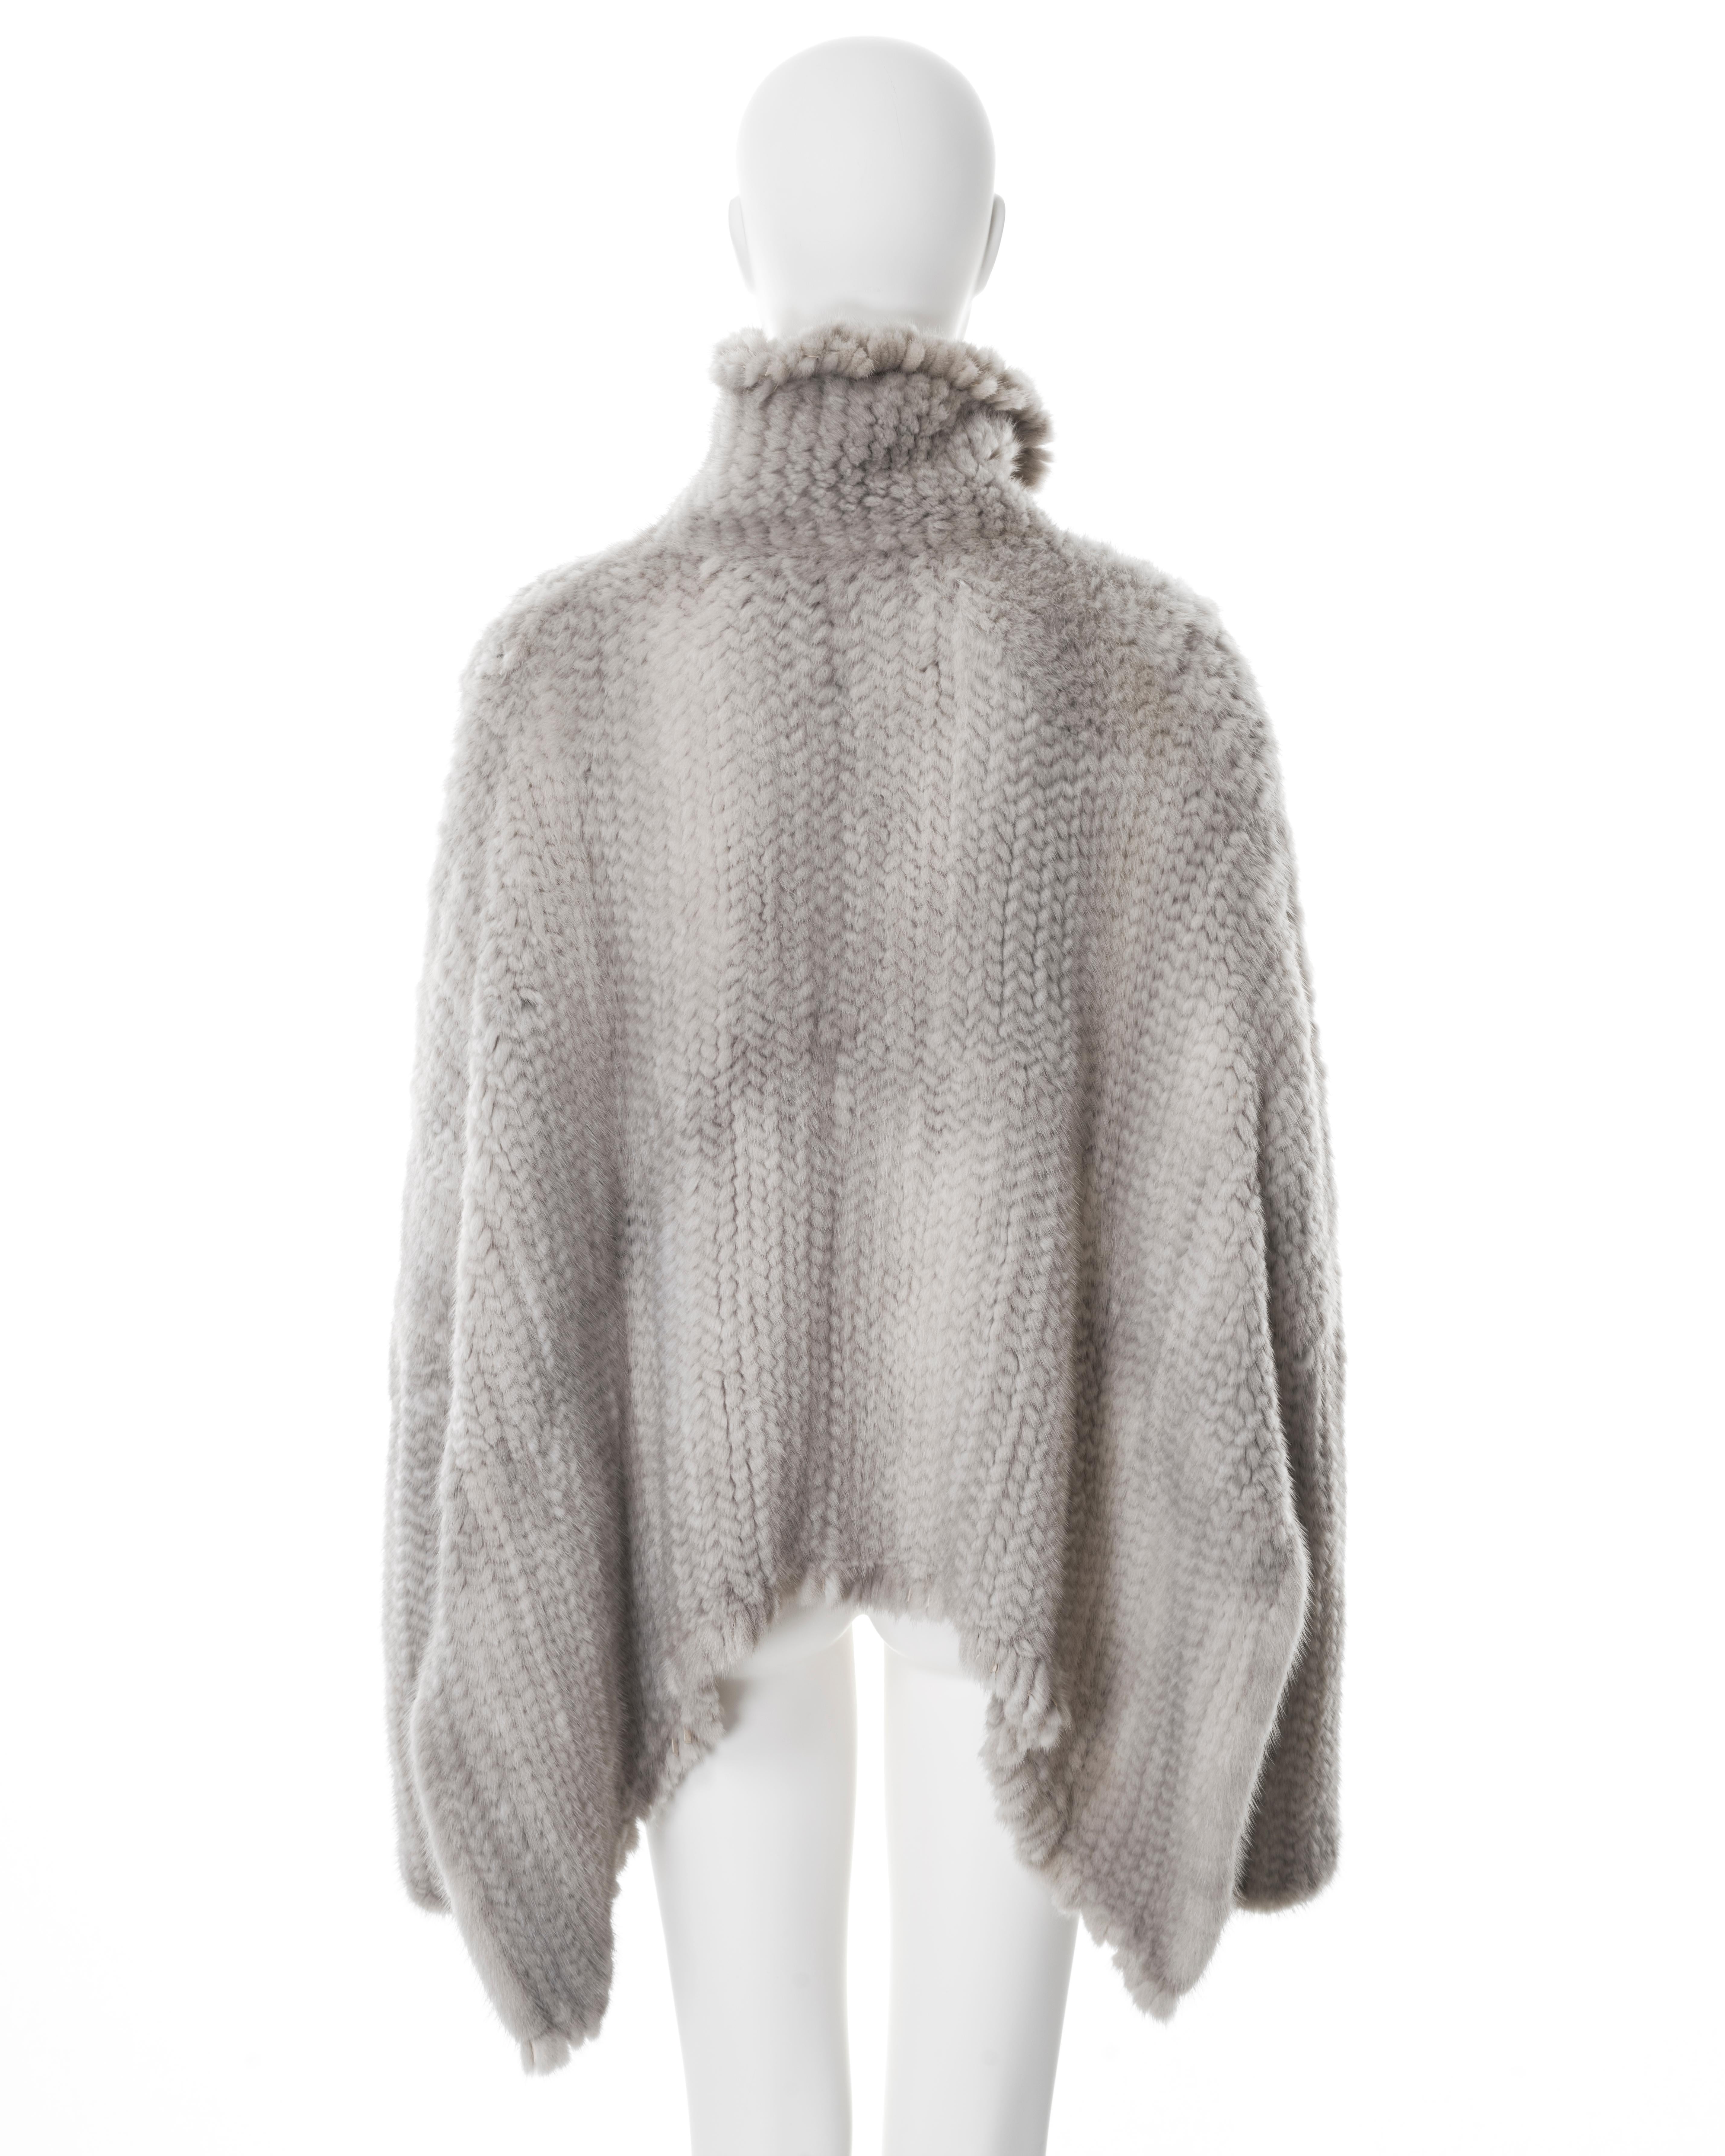 Christian Dior by John Galliano light grey knitted mink fur sweater, fw 2000 3